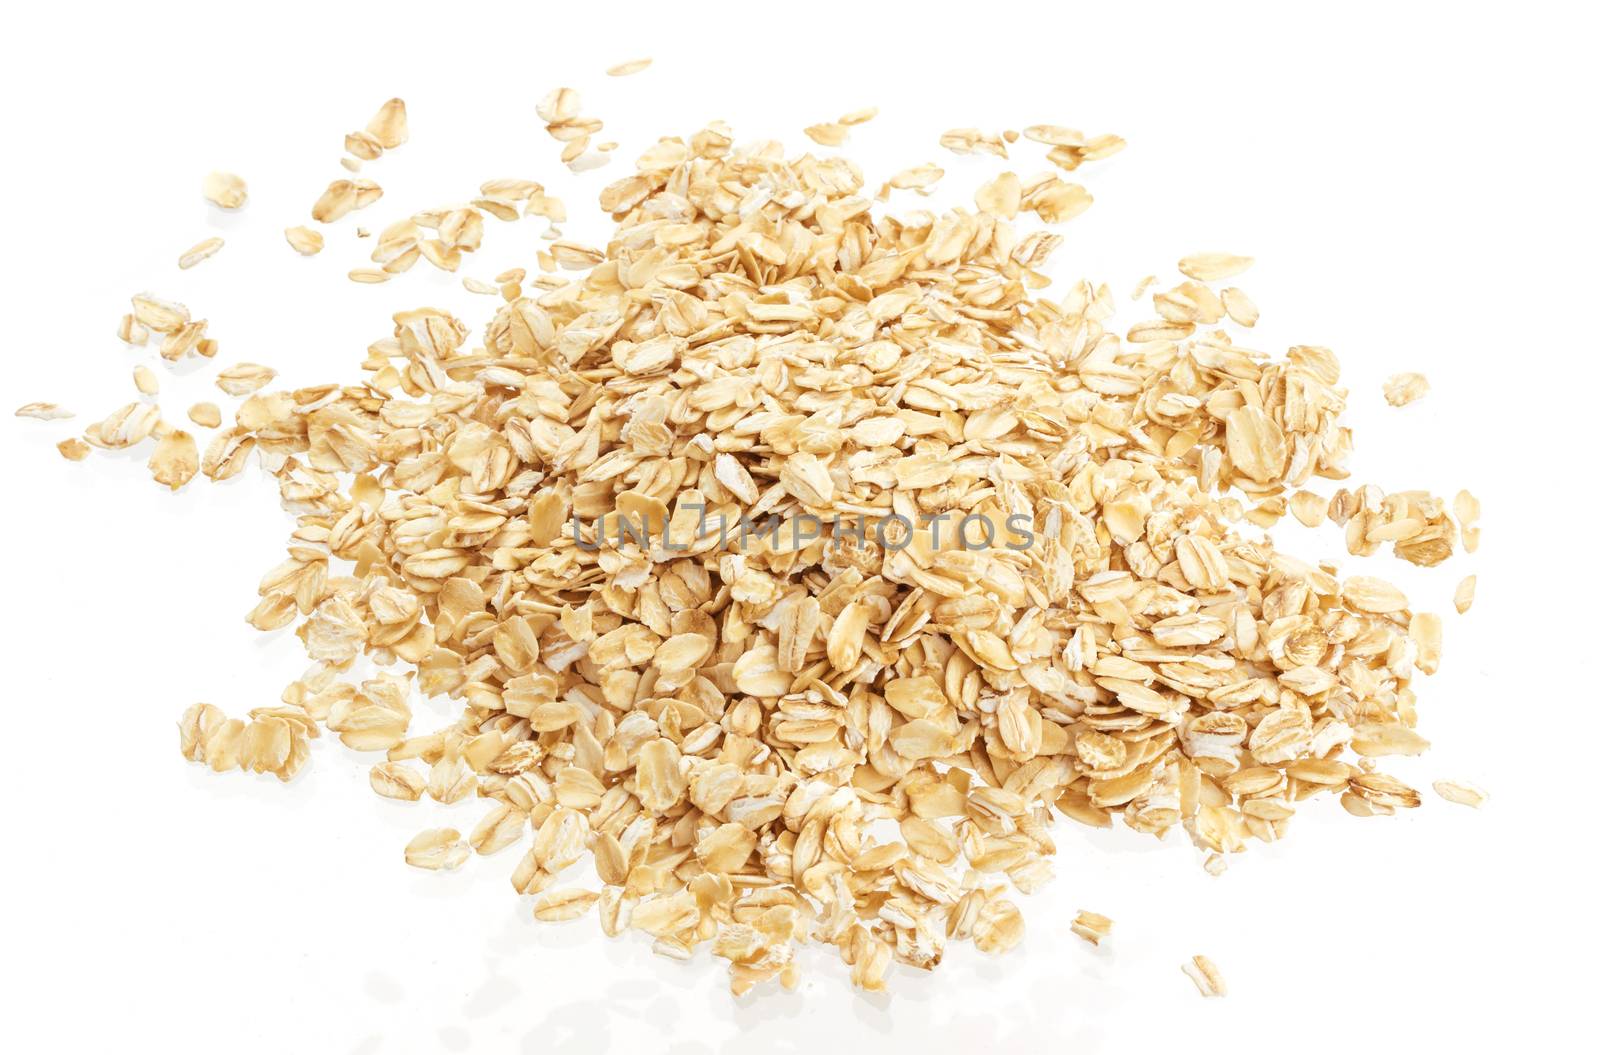 Pile of oat flakes isolated on white background. Top view by xamtiw